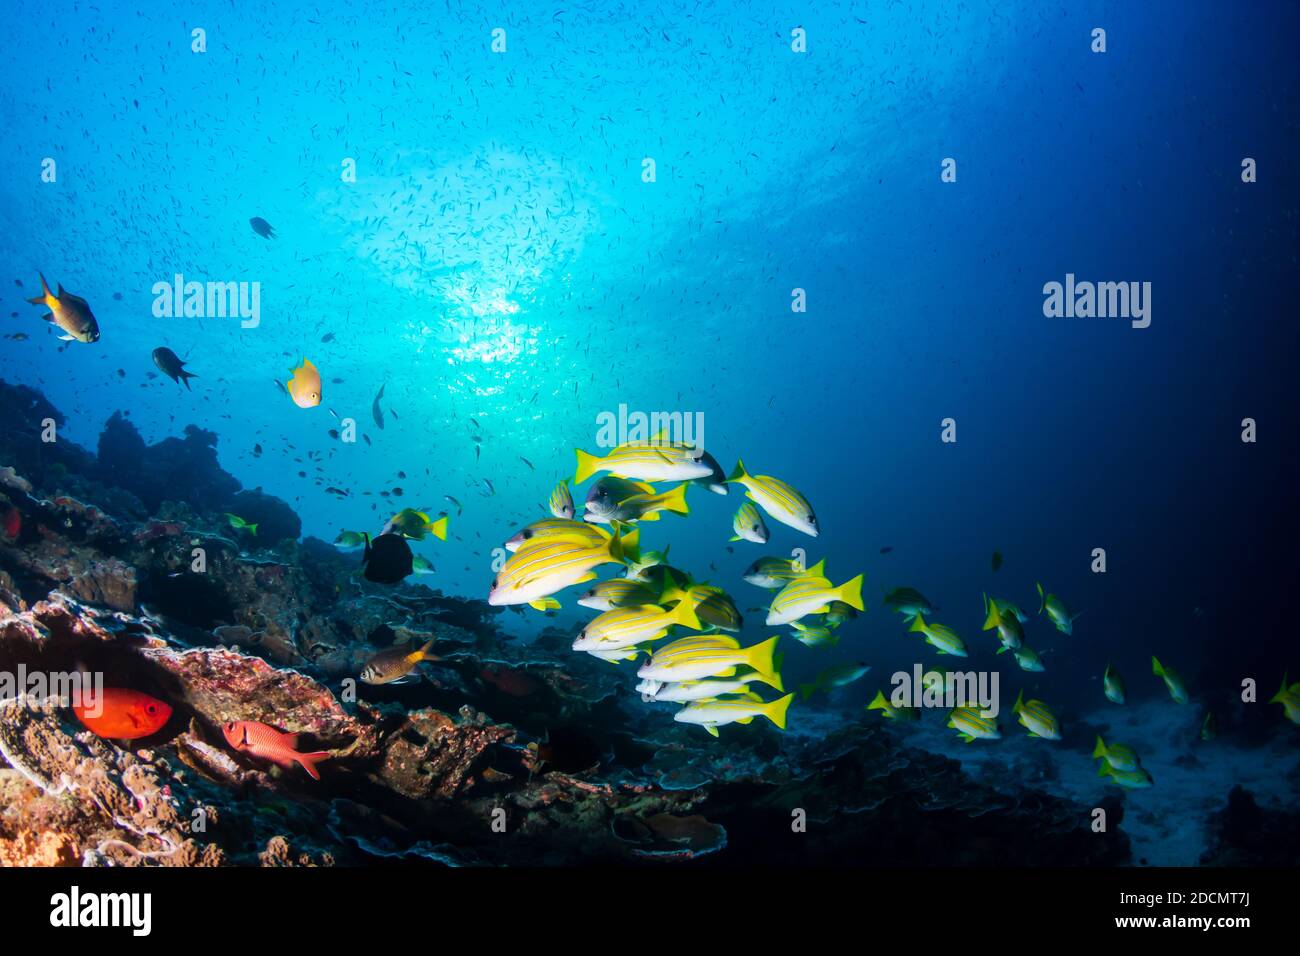 School of colorful 5 lined Snapper on a tropical coral reef in the Andaman Sea Stock Photo